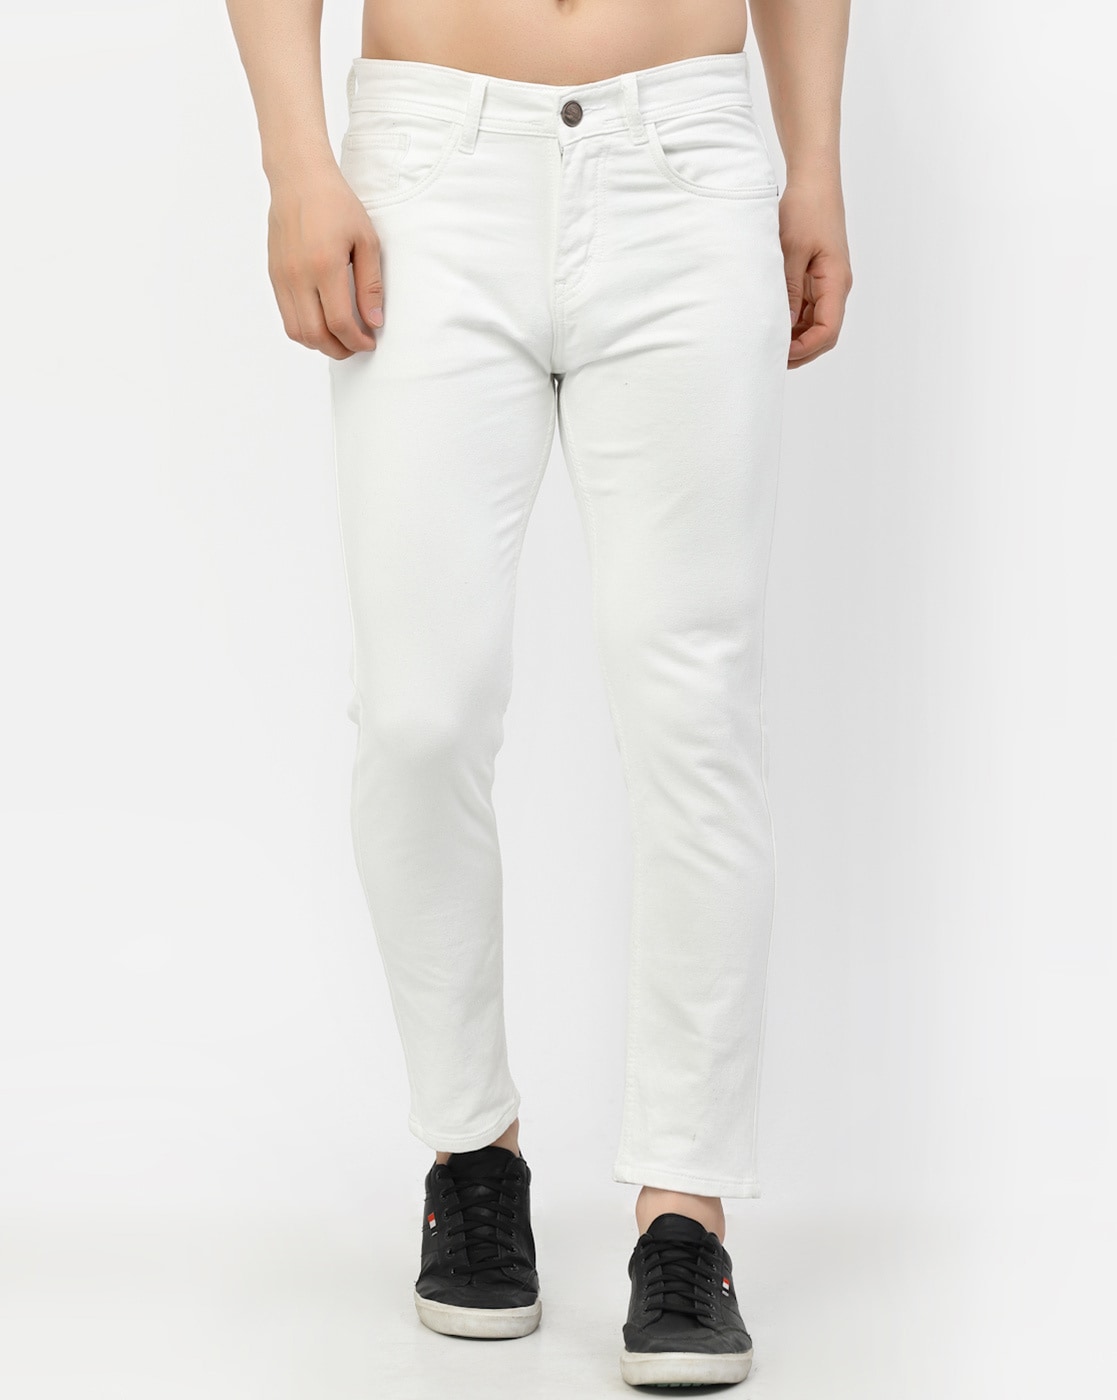 United Colors Of Benetton Off White Jeans - Buy United Colors Of Benetton  Off White Jeans online in India